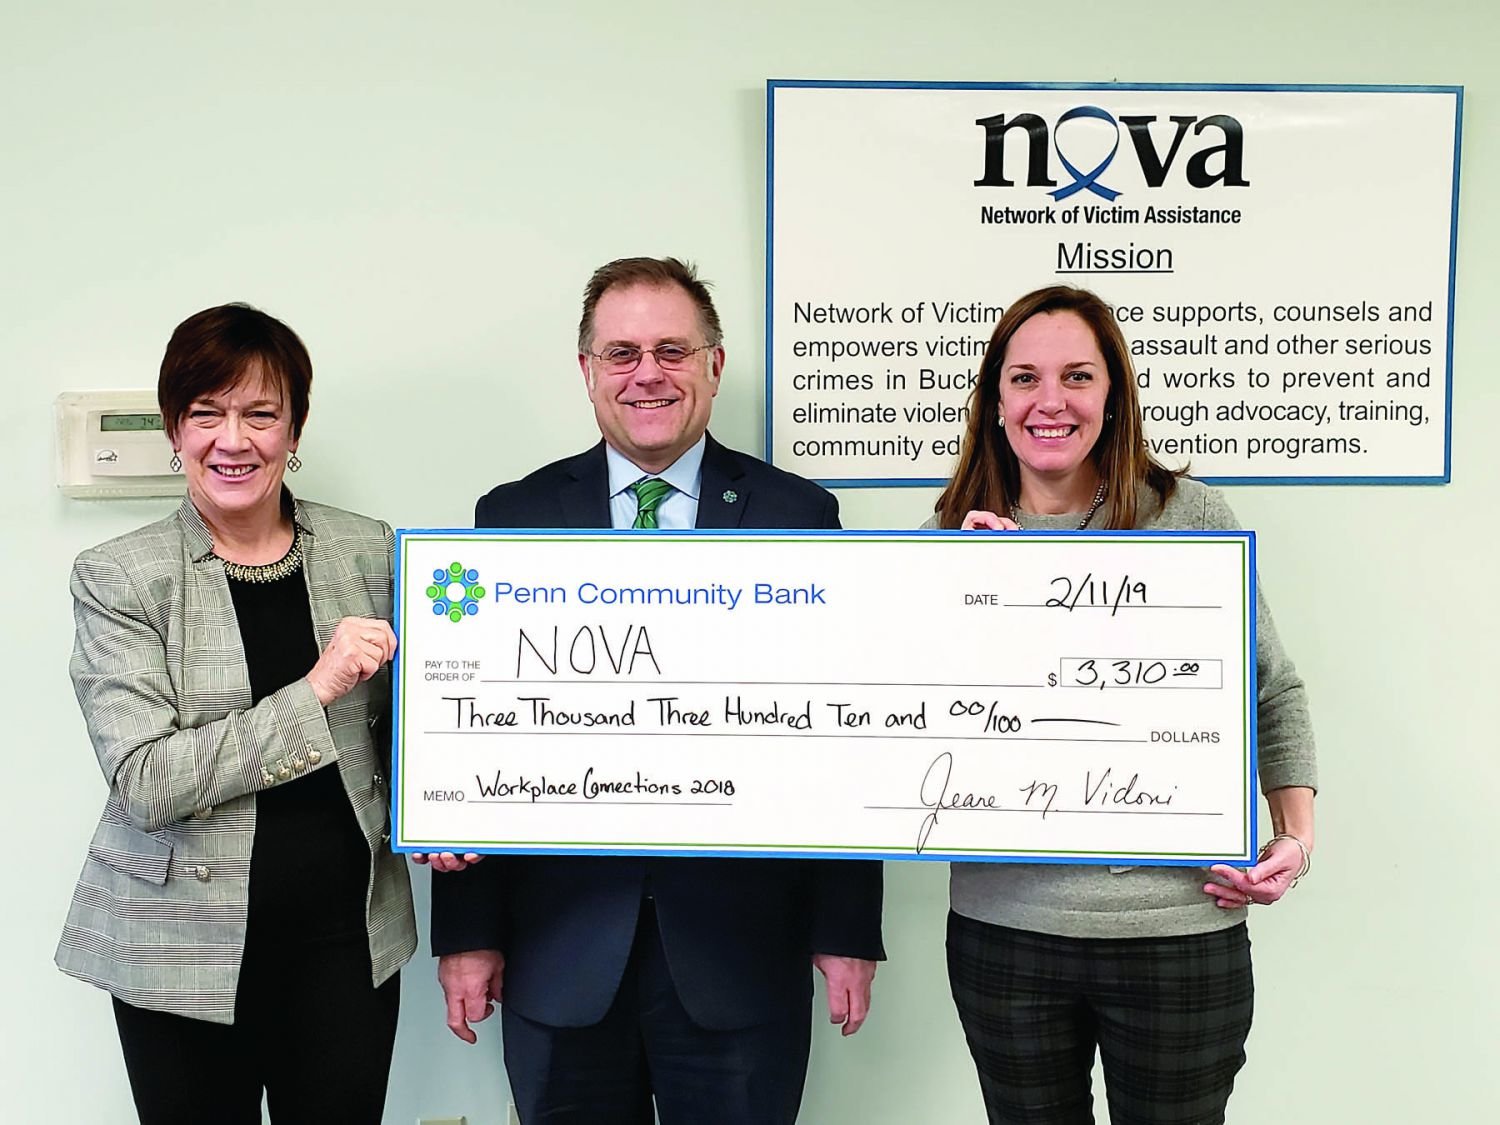 Todd R. Hurley, chief relationship officer, Penn Community Bank, center, presents a $3,310 donation to Penny Ettinger, Network of Victim Assistance (NOVA) executive director, left, and Mandy Mundy, NOVA senior director - Programs and Services.